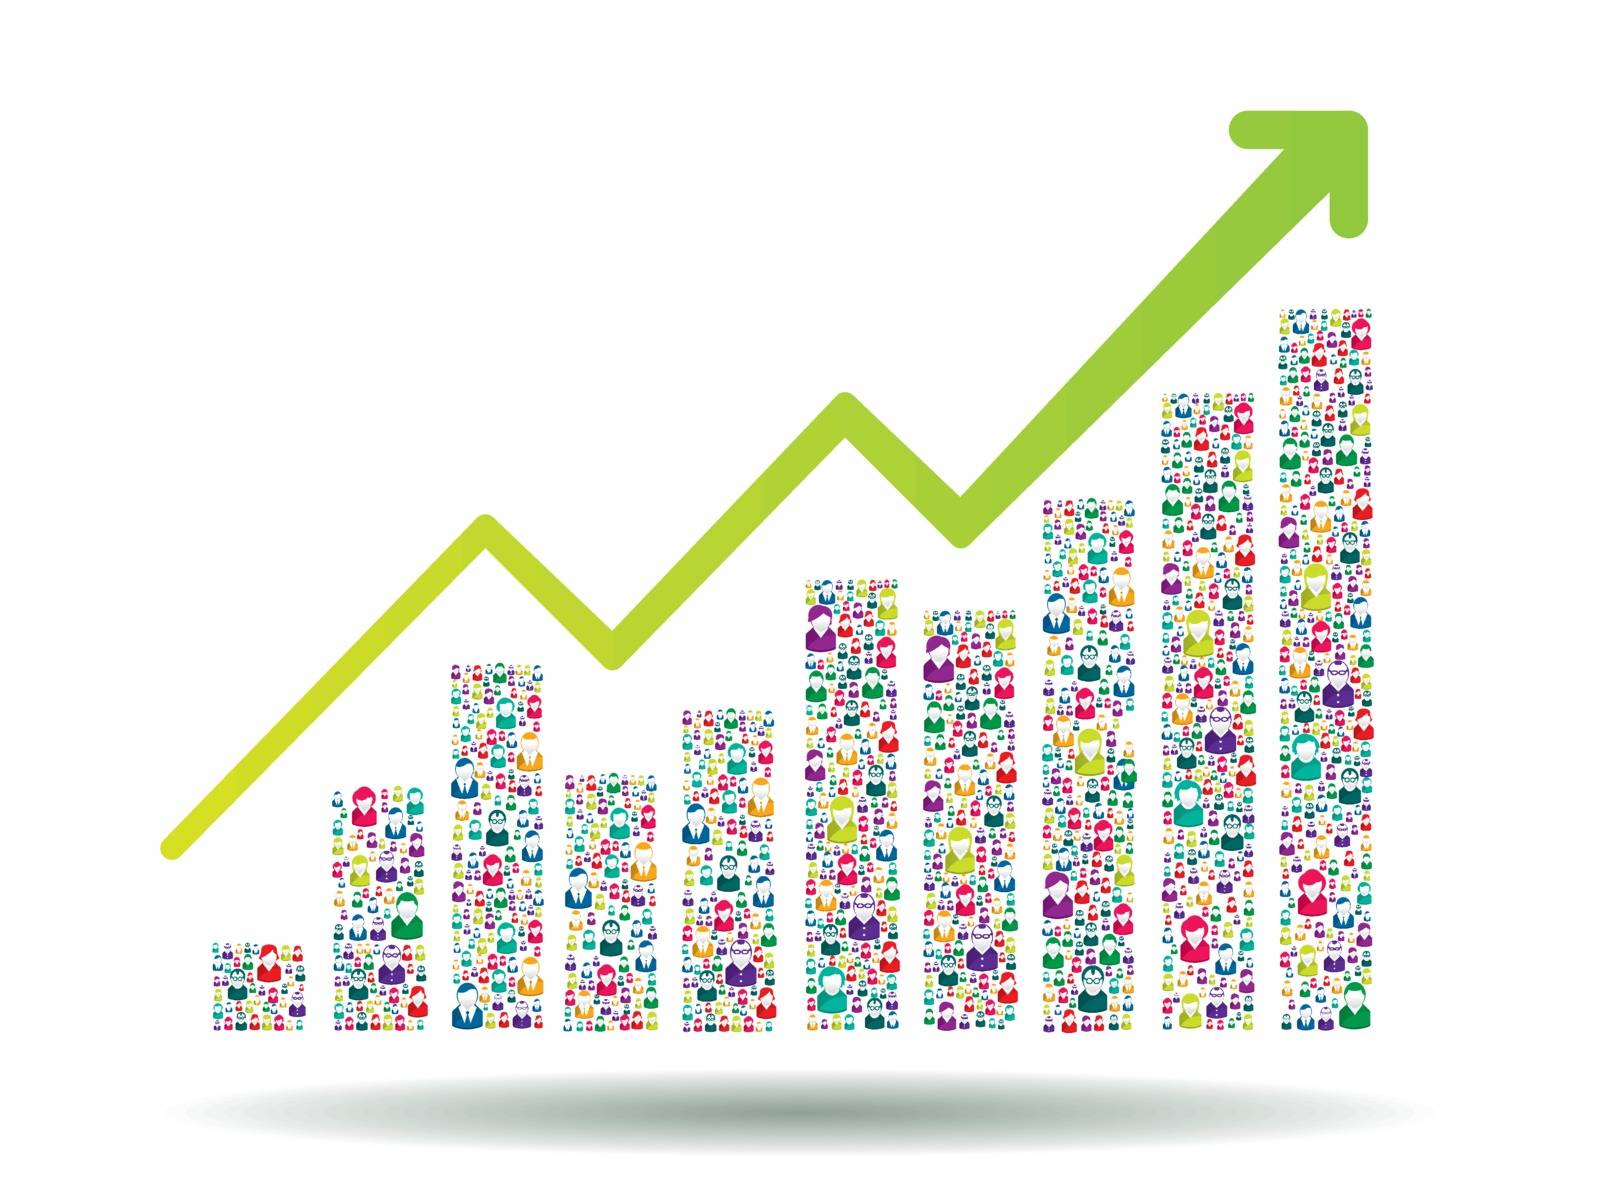 Growth chart and progress leading to success. Growth graph with people icons.